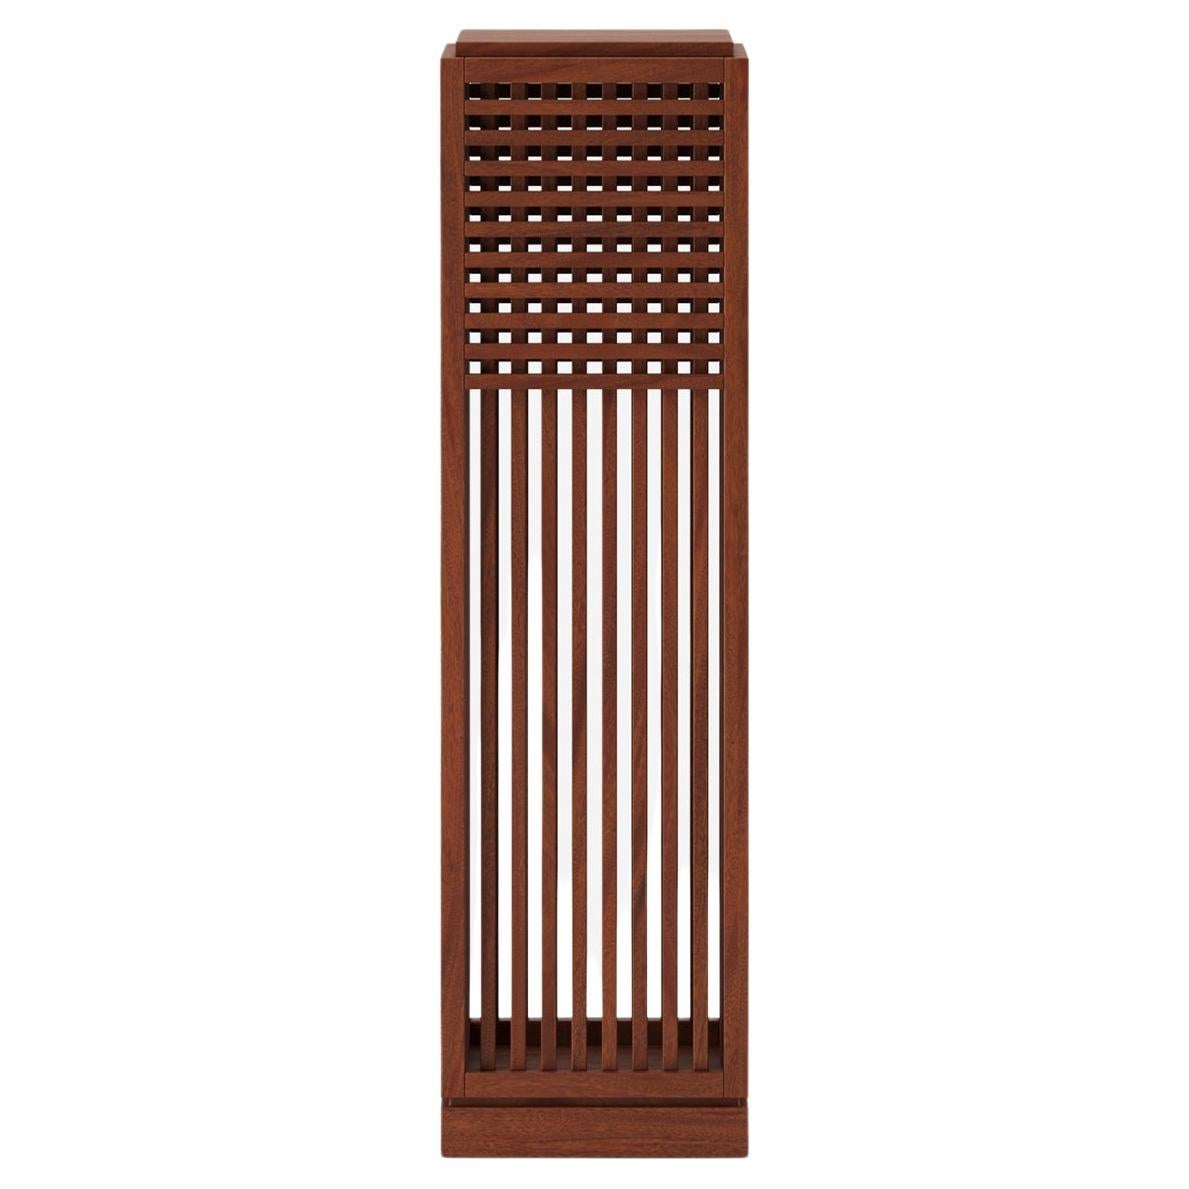 Riviera Plinth Tall in Oiled African Mahogany Designed by Yaniv Chen for Lemon For Sale